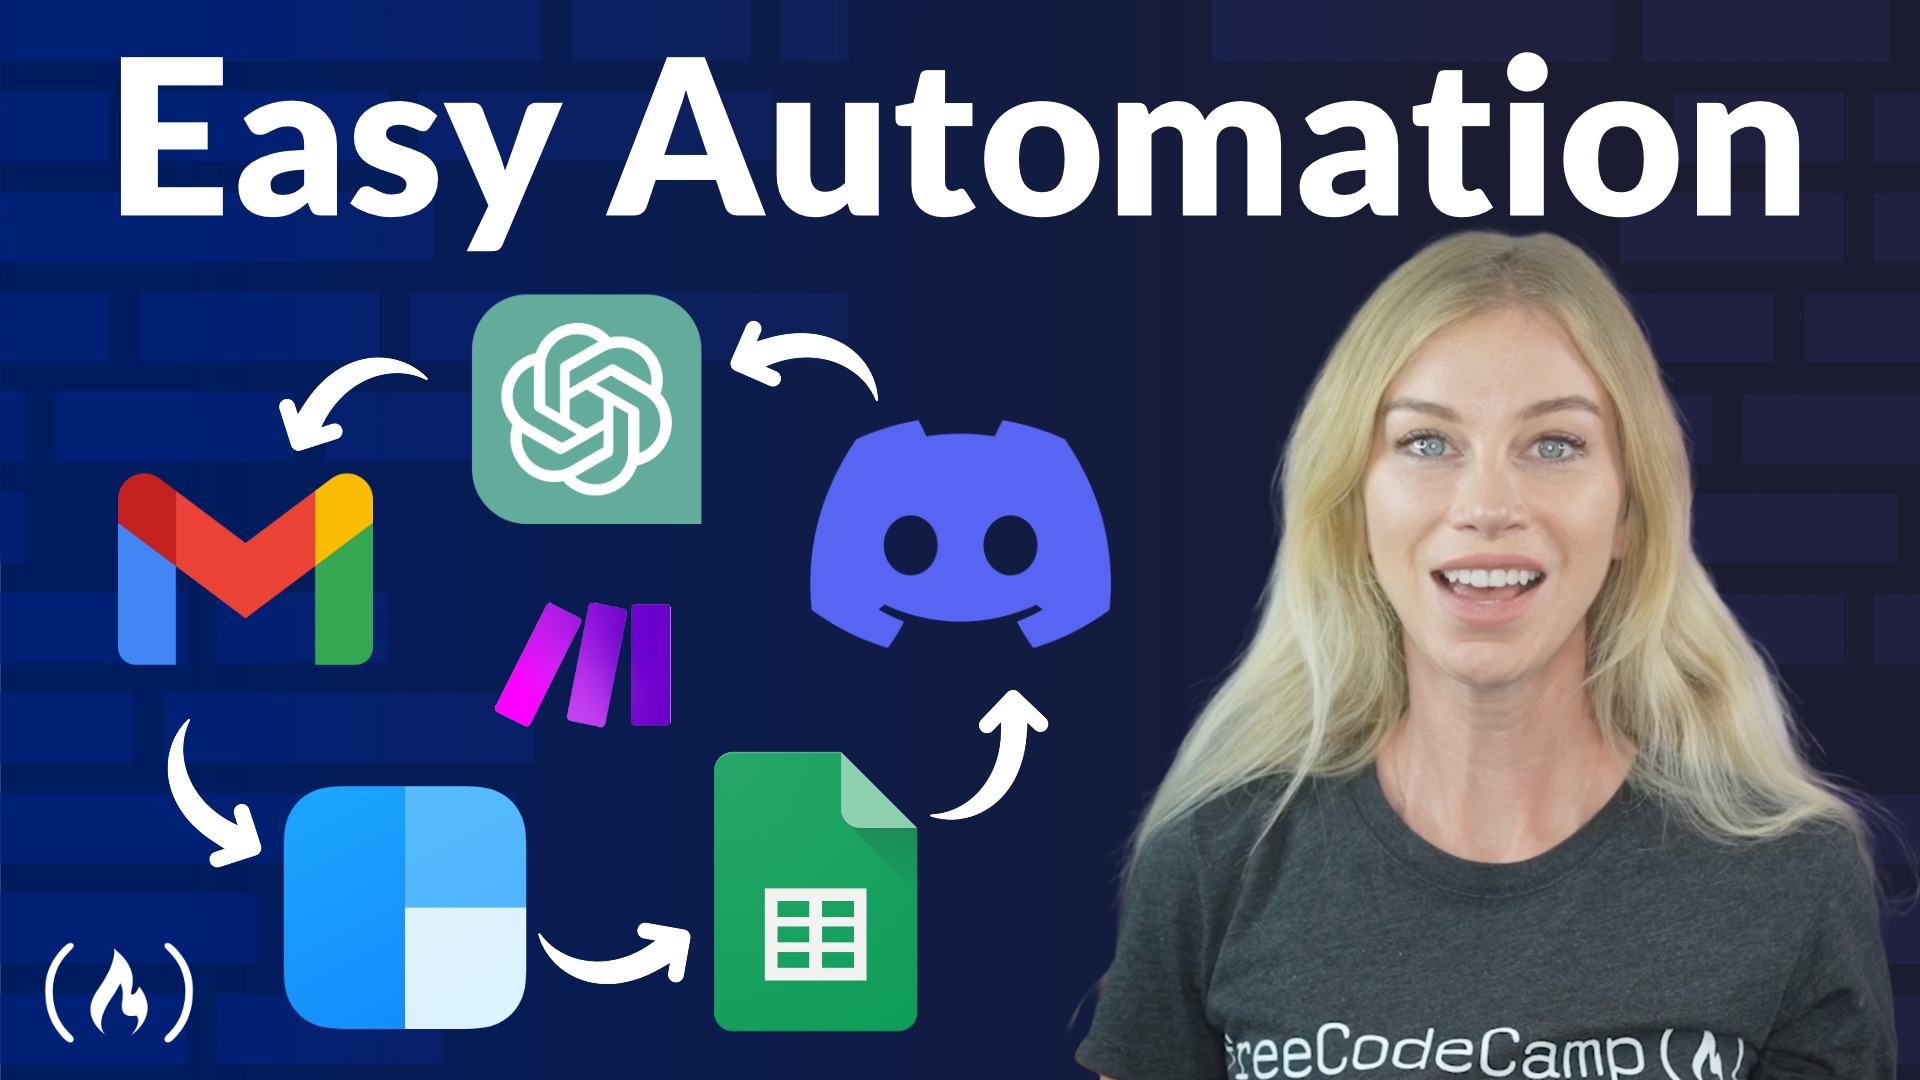 Image for Learn how to Automate Your Boring Tasks. No-Code Automation [Full Course]